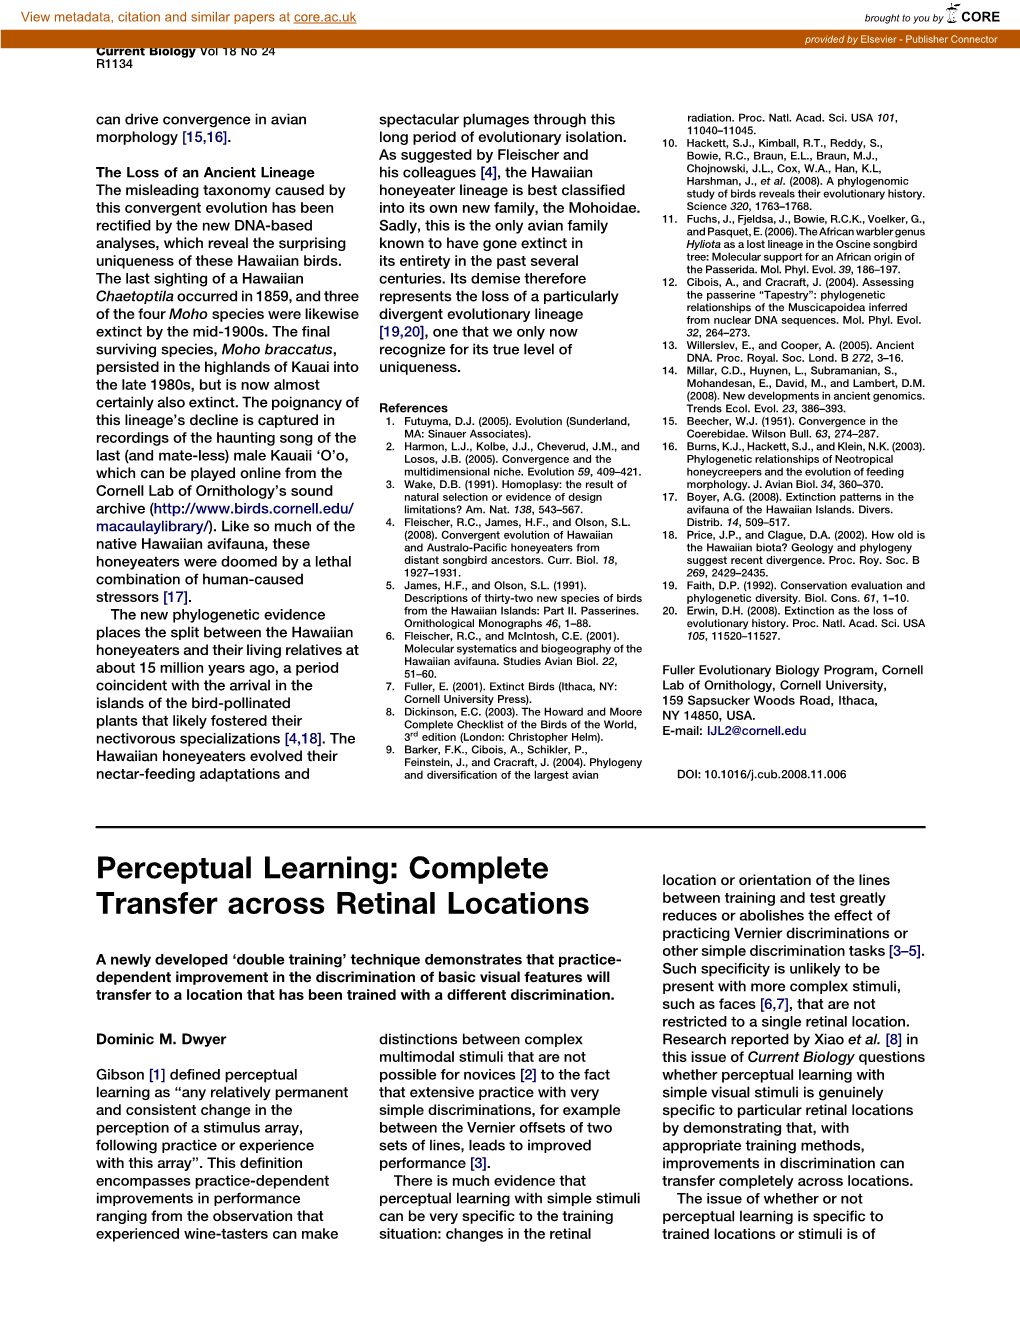 Perceptual Learning: Complete Transfer Across Retinal Locations